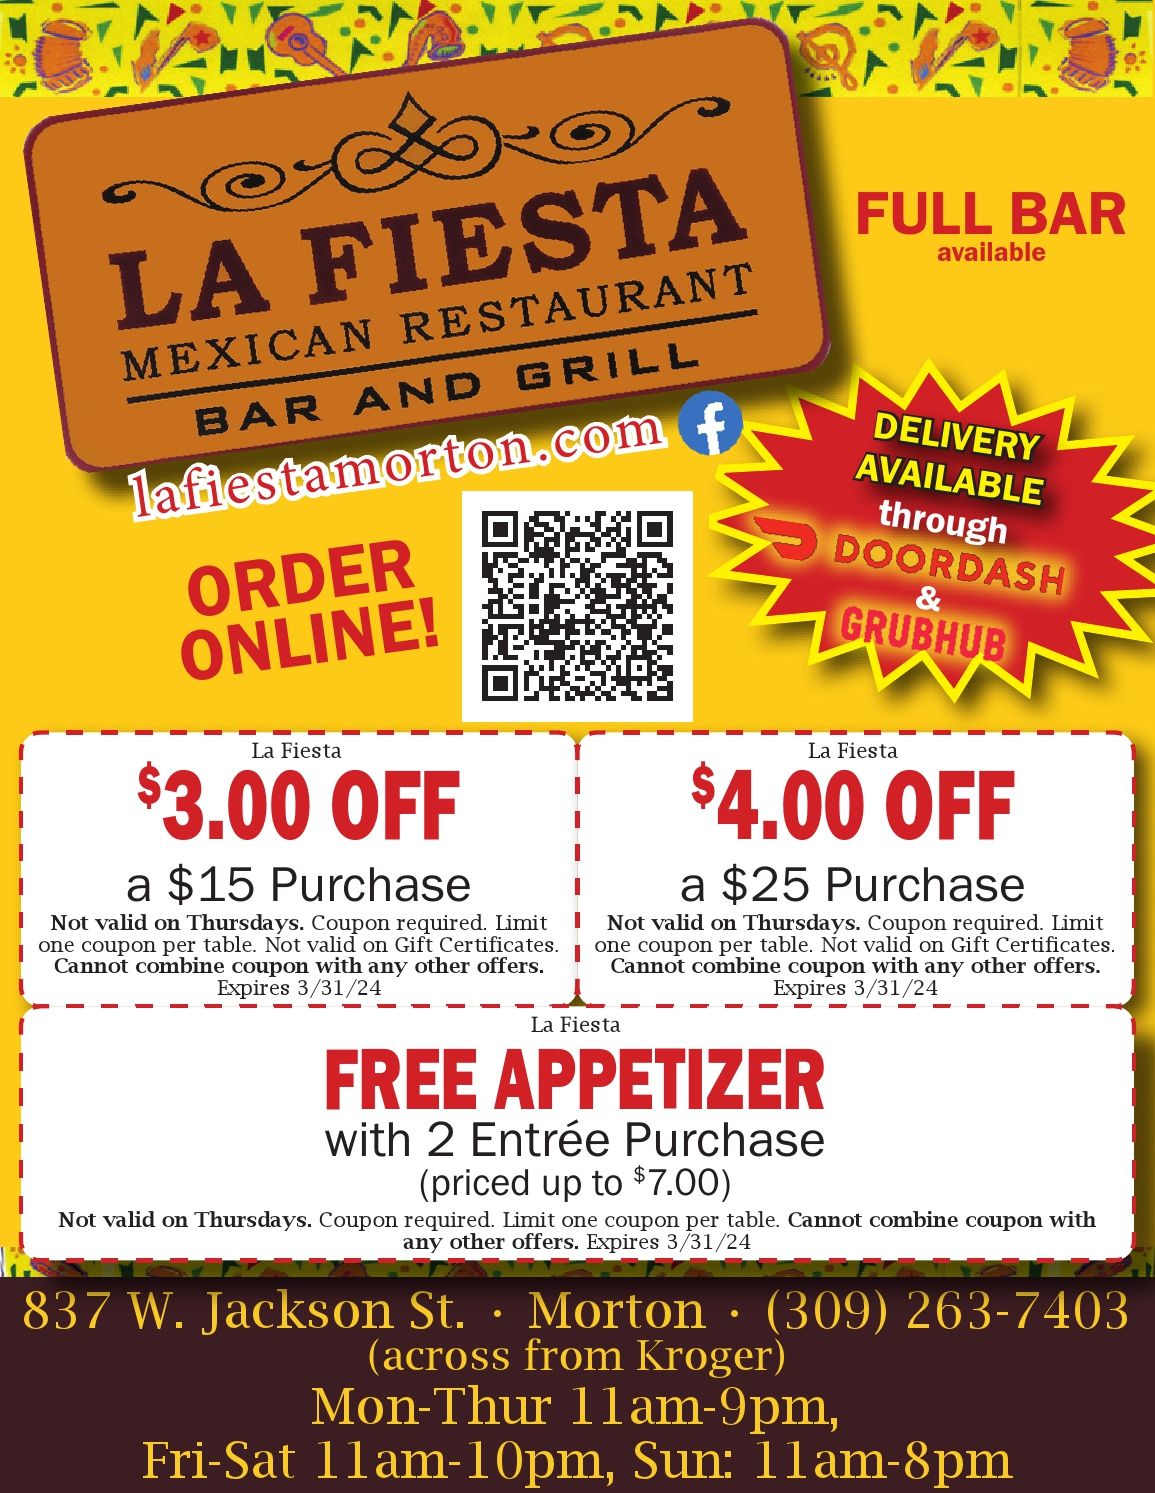 La Fiesta Mexican Restaurant Bar and Grill $2 off $10, $4 off $20, free appetizer coupons, 99 cent taco tuesday Morton, IL